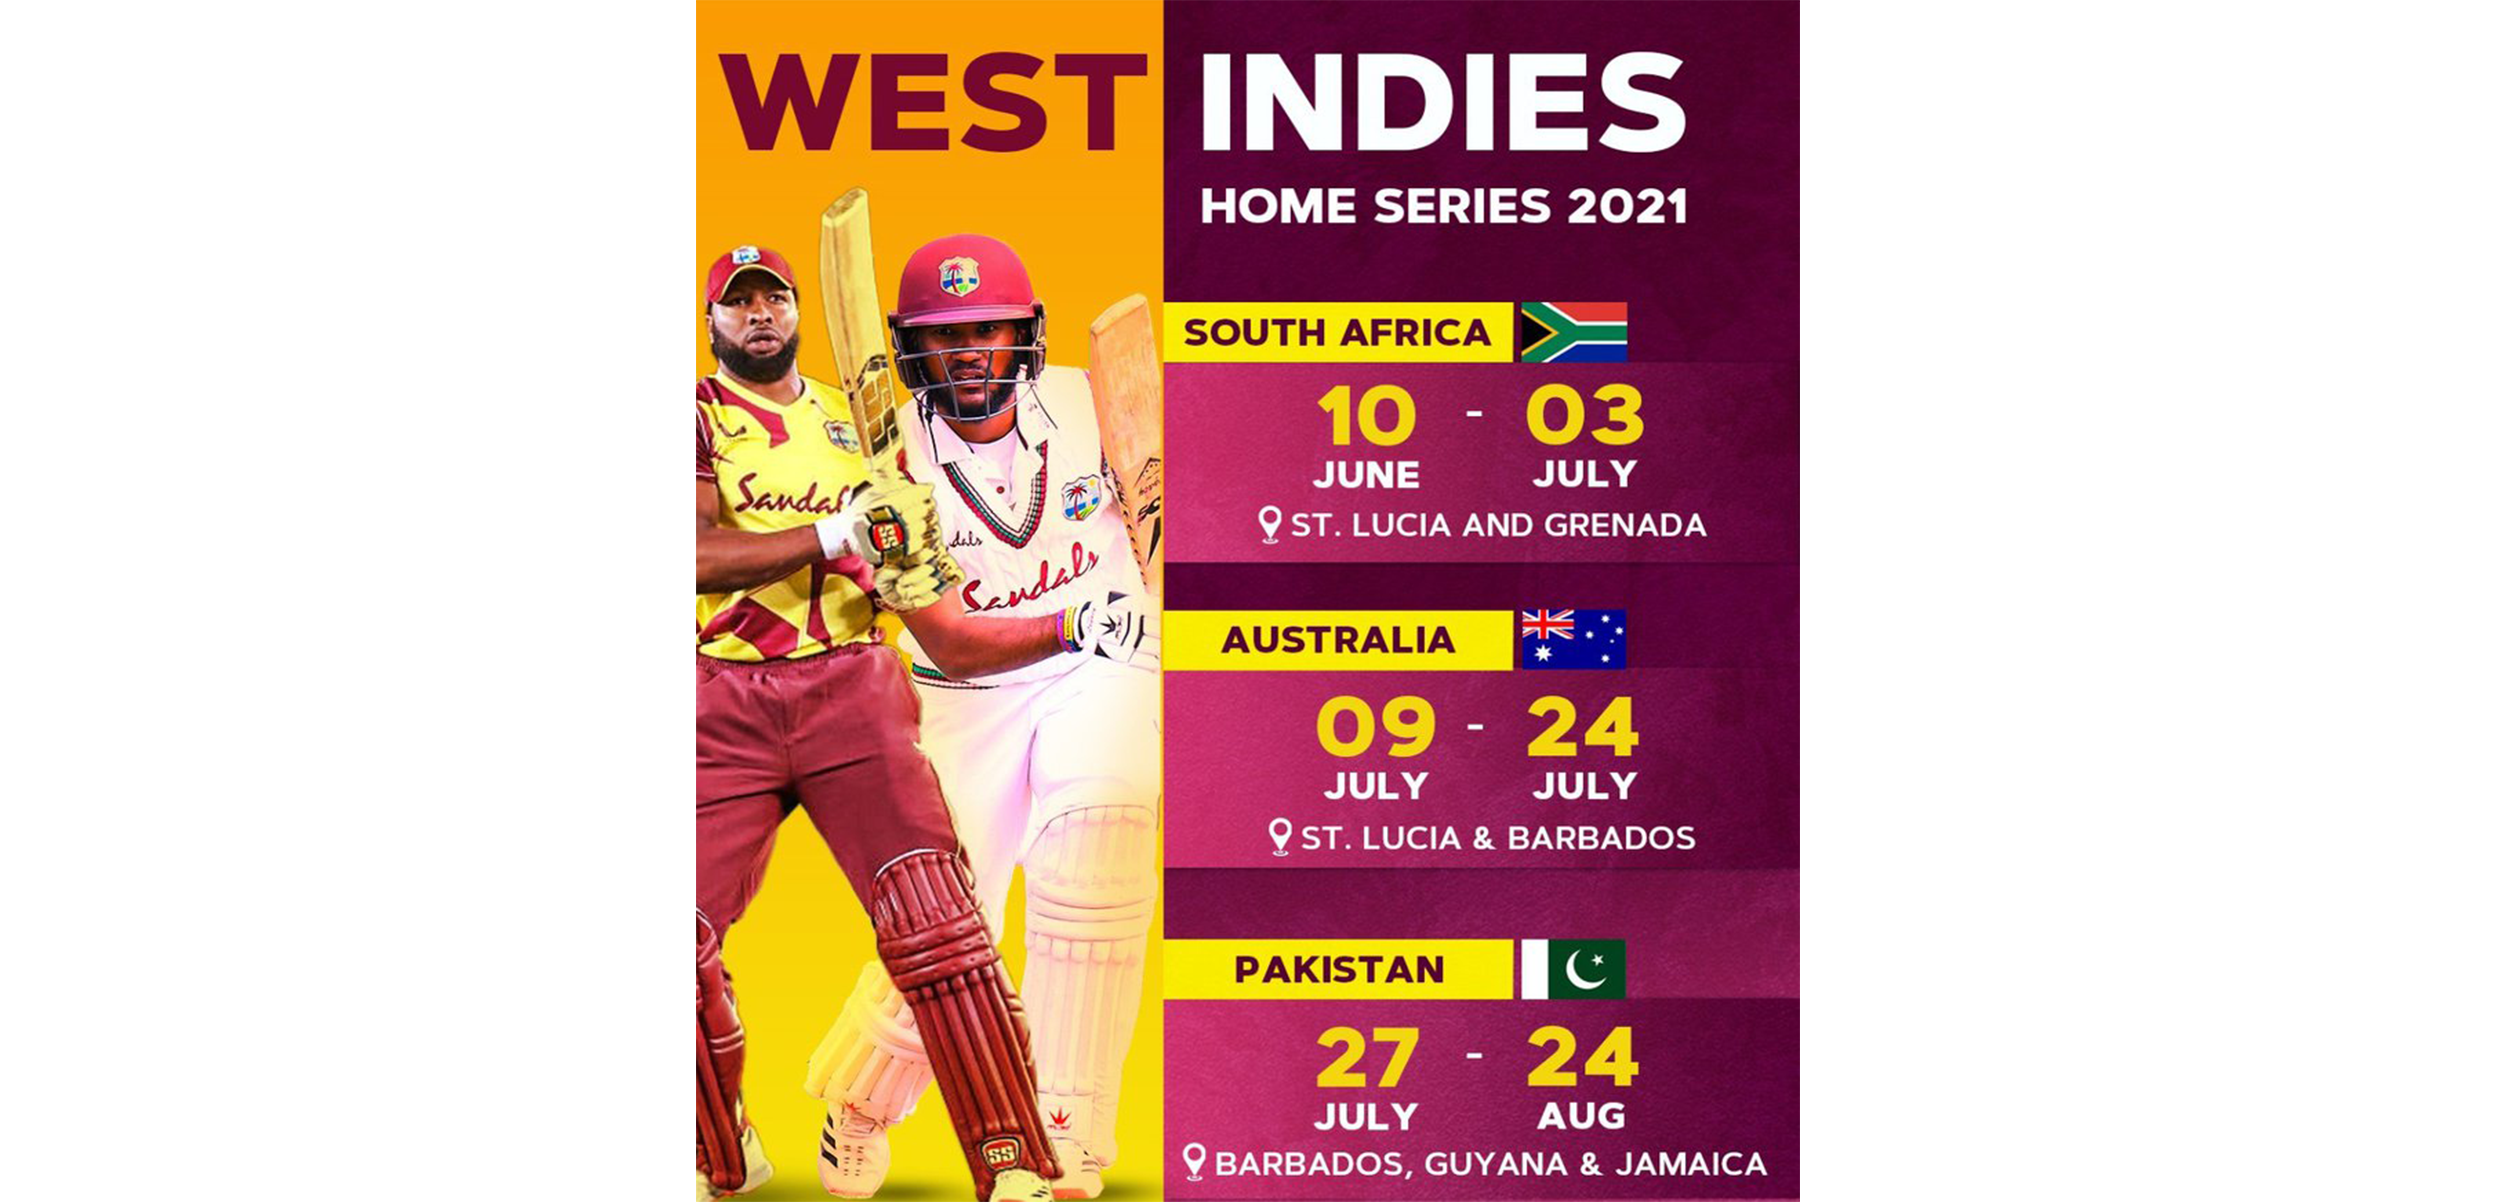 CWI confirms busy summer home schedule for West Indies Men